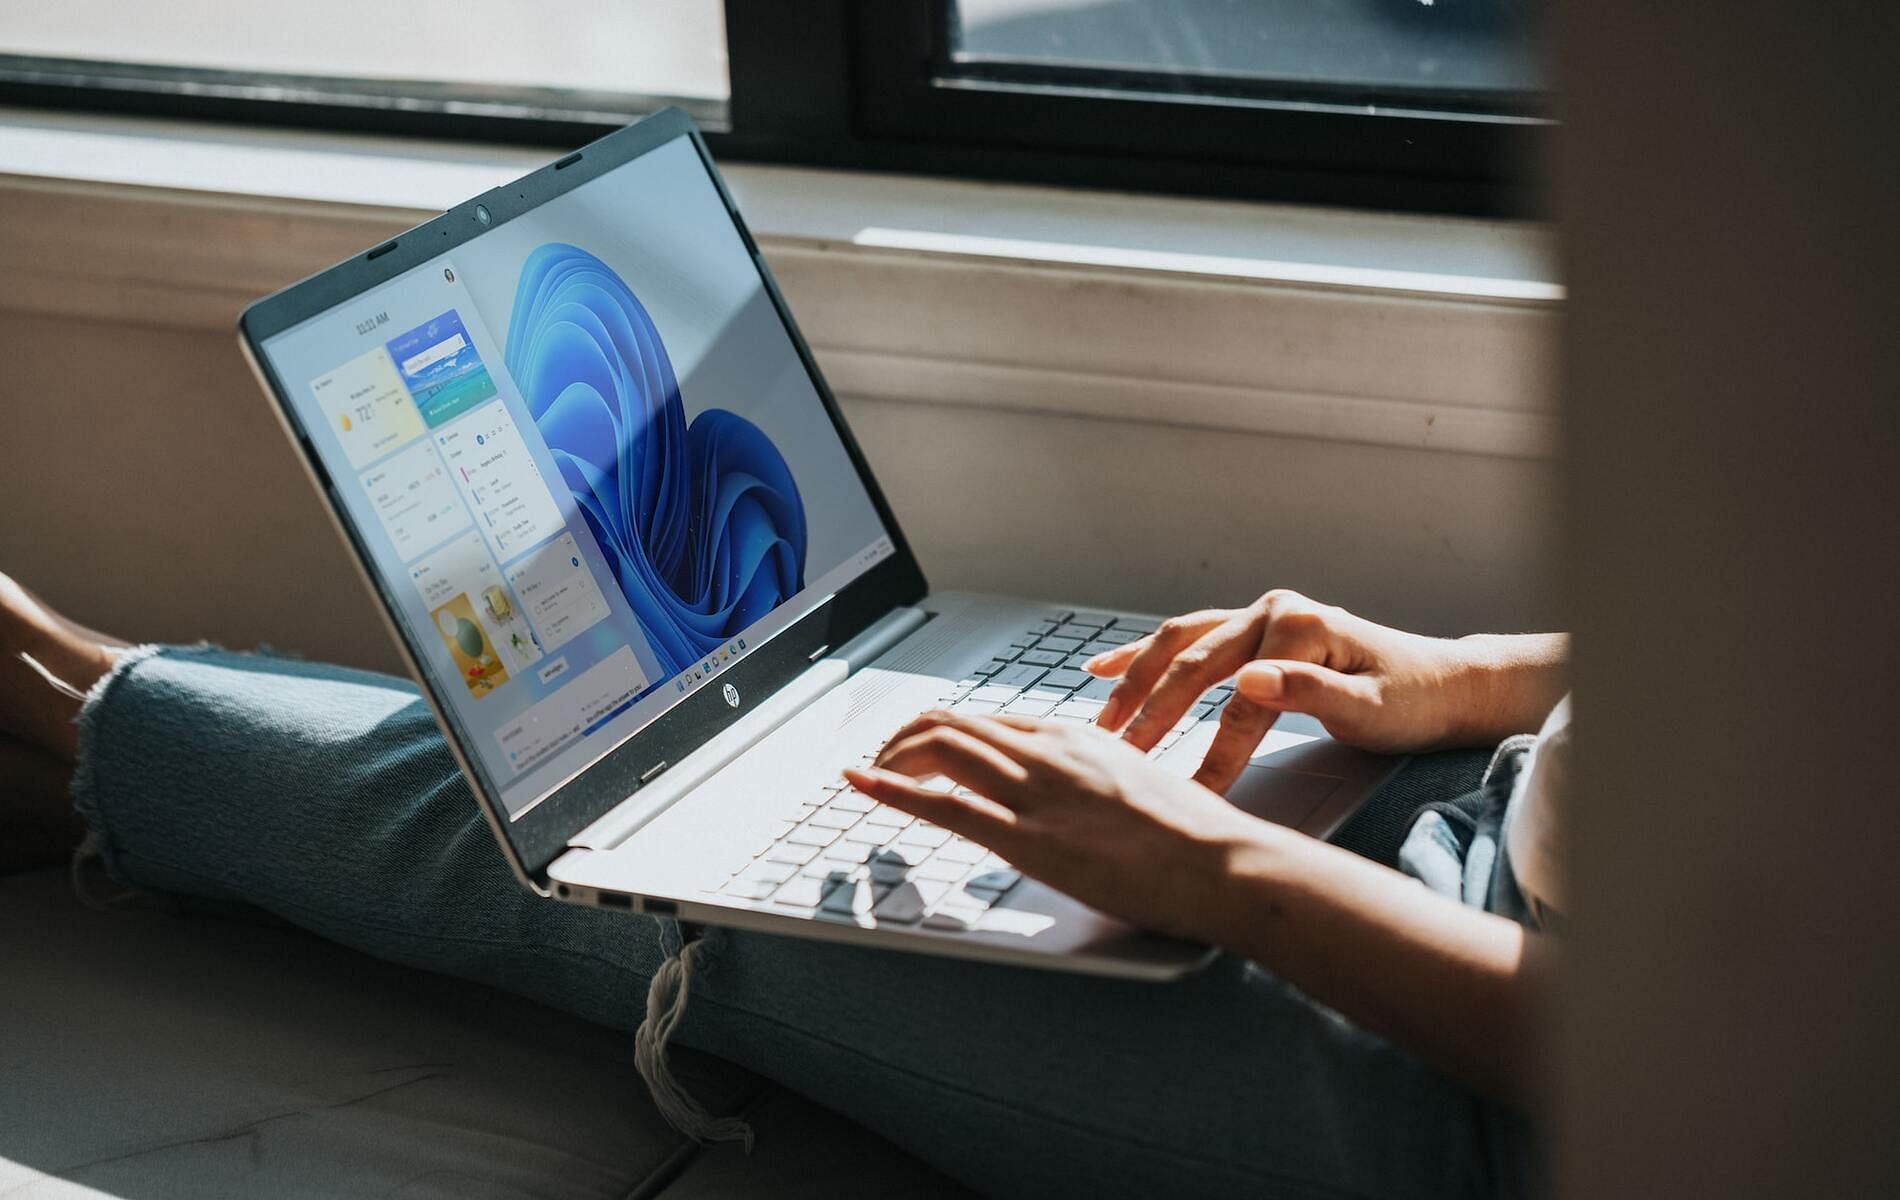 Owning a Microsoft account and an internet connection is now reportedly mandatory for Windows 11 2H22. (Image via Unsplash)